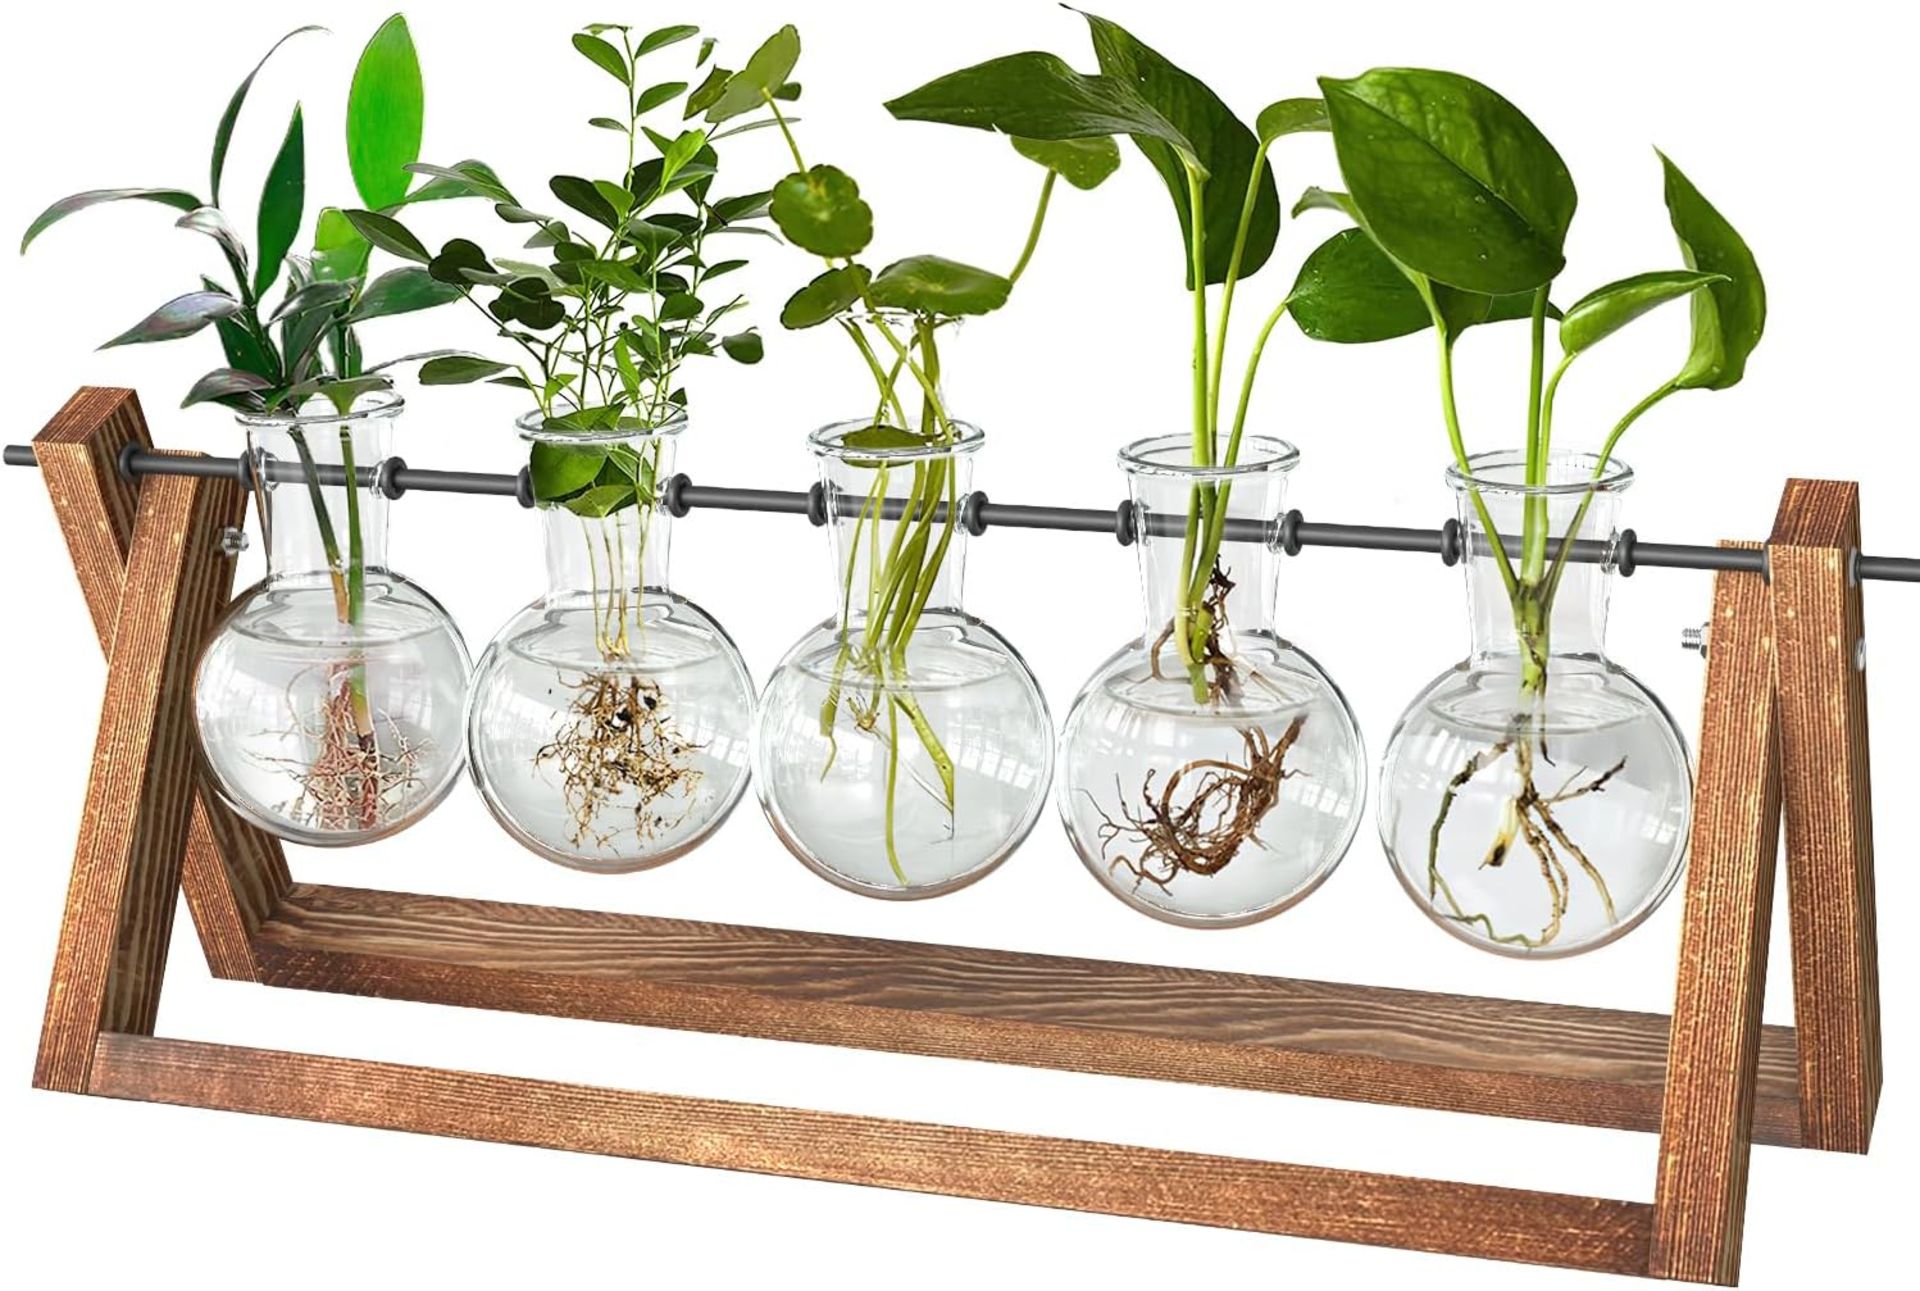 RRP £18.99 cfmour Plant Terrarium with Wooden Stand, Desktop Propagation Stations Glass Air